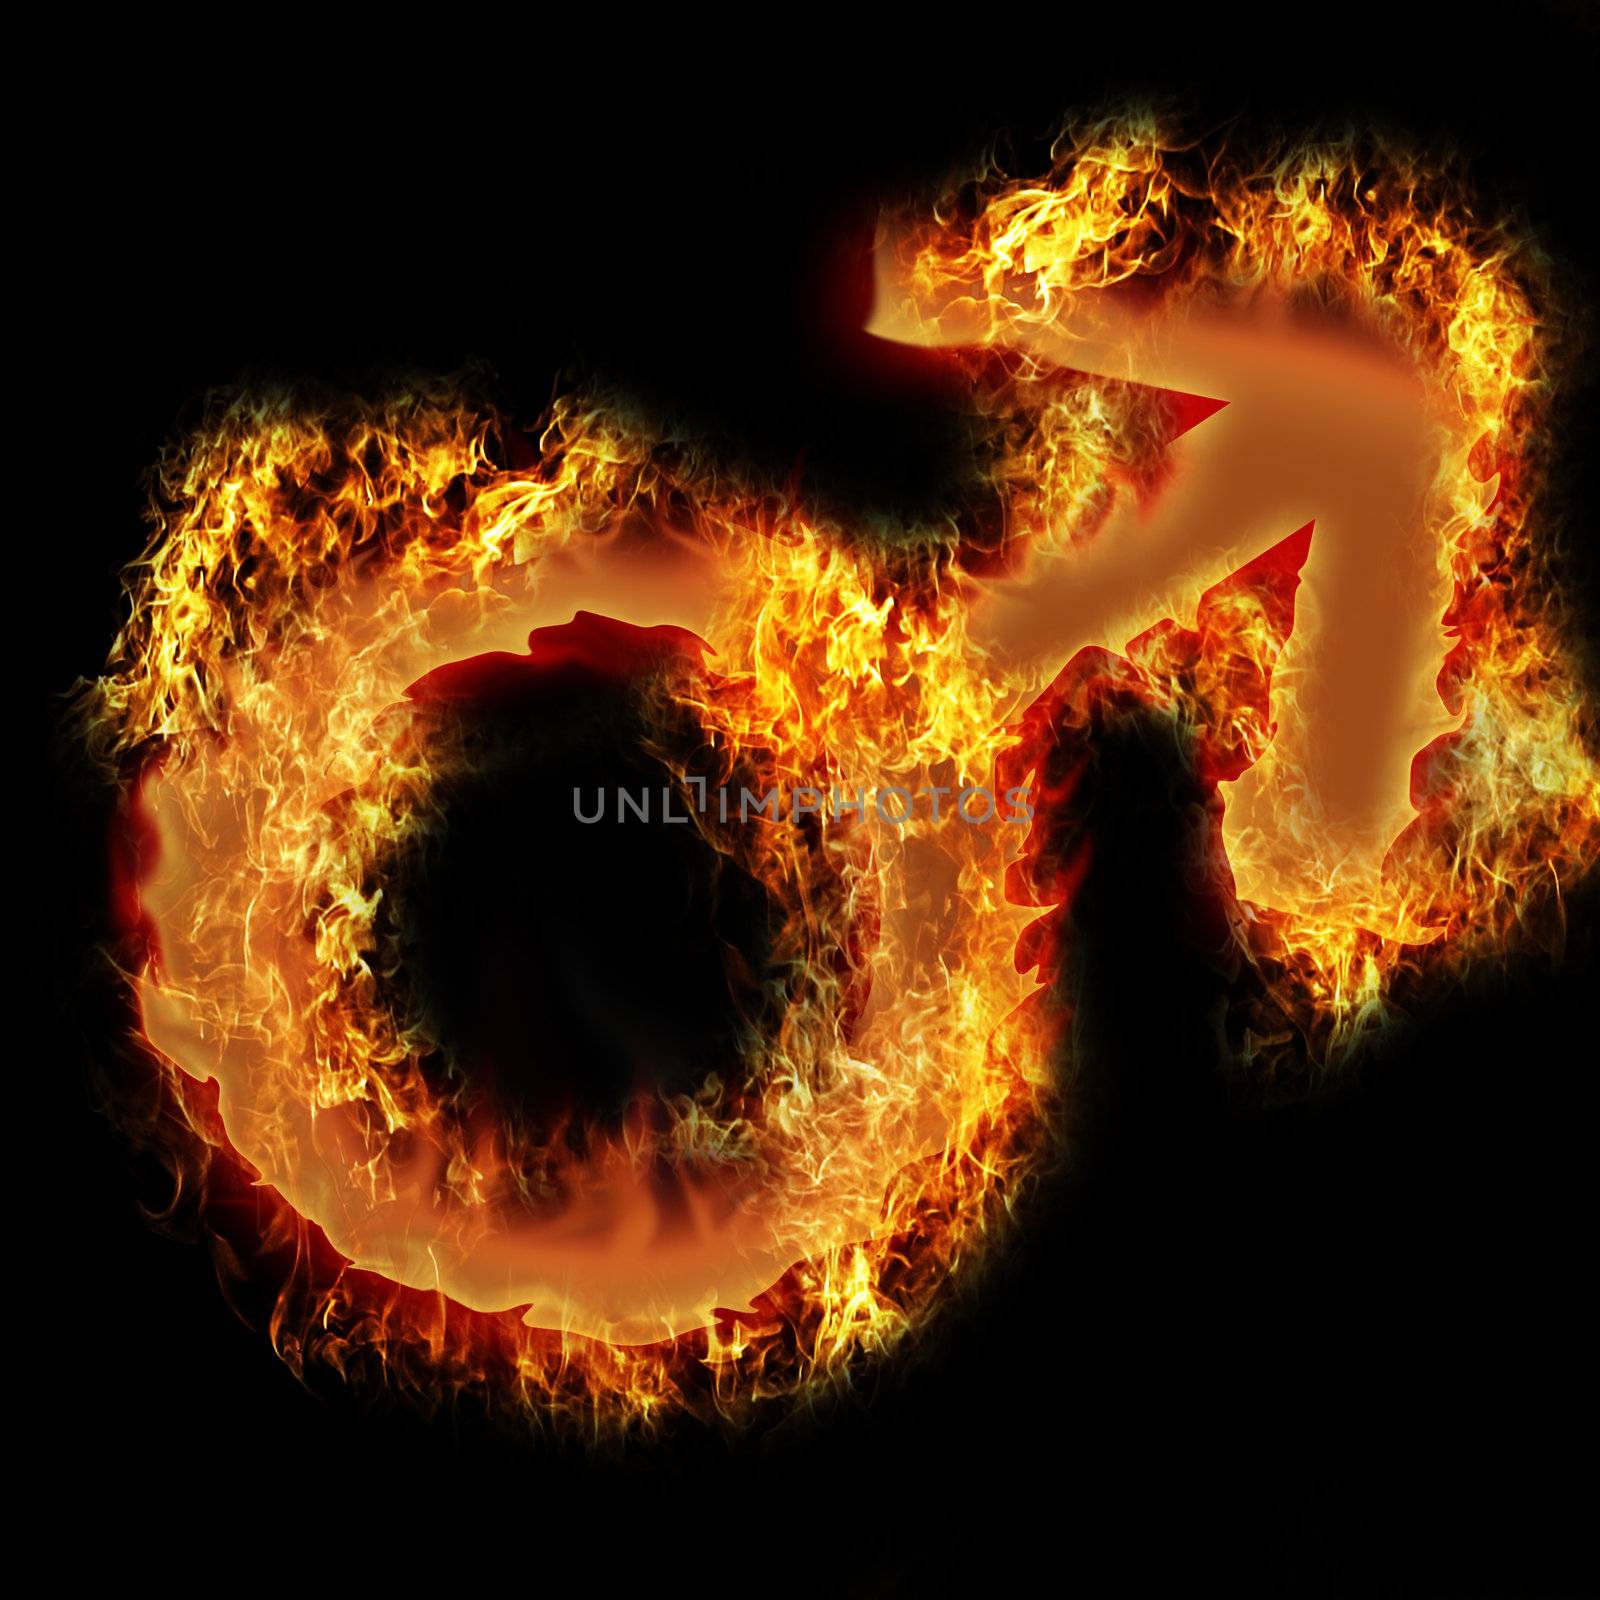 burning man sign by Spartacus